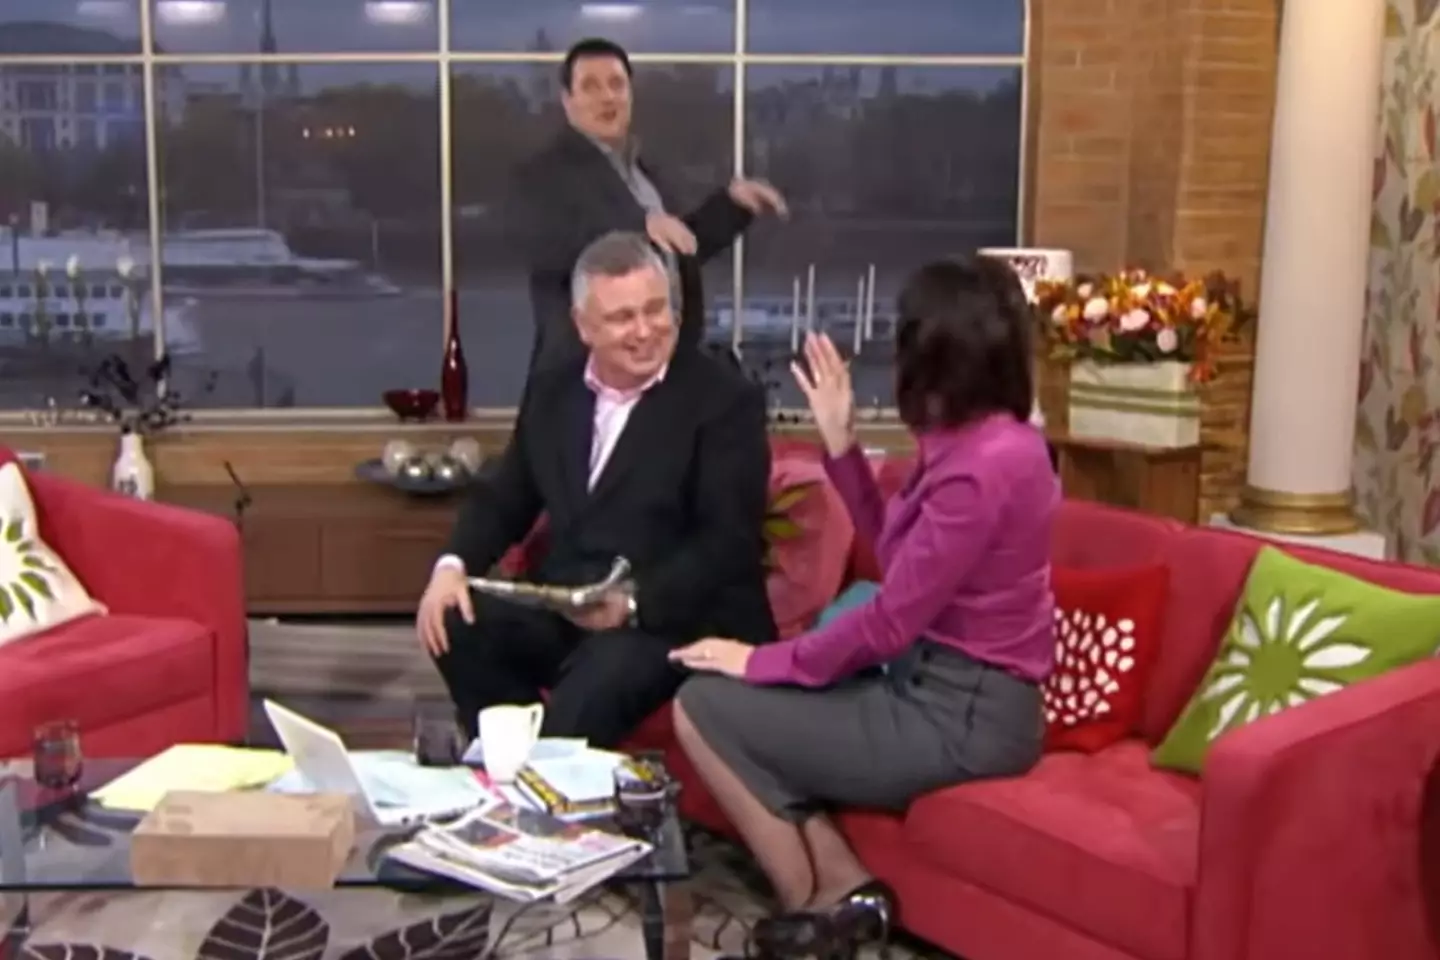 Peter Kay tried in vain to get Eamonn Holmes to understand what a 'dog's lipstick' was.